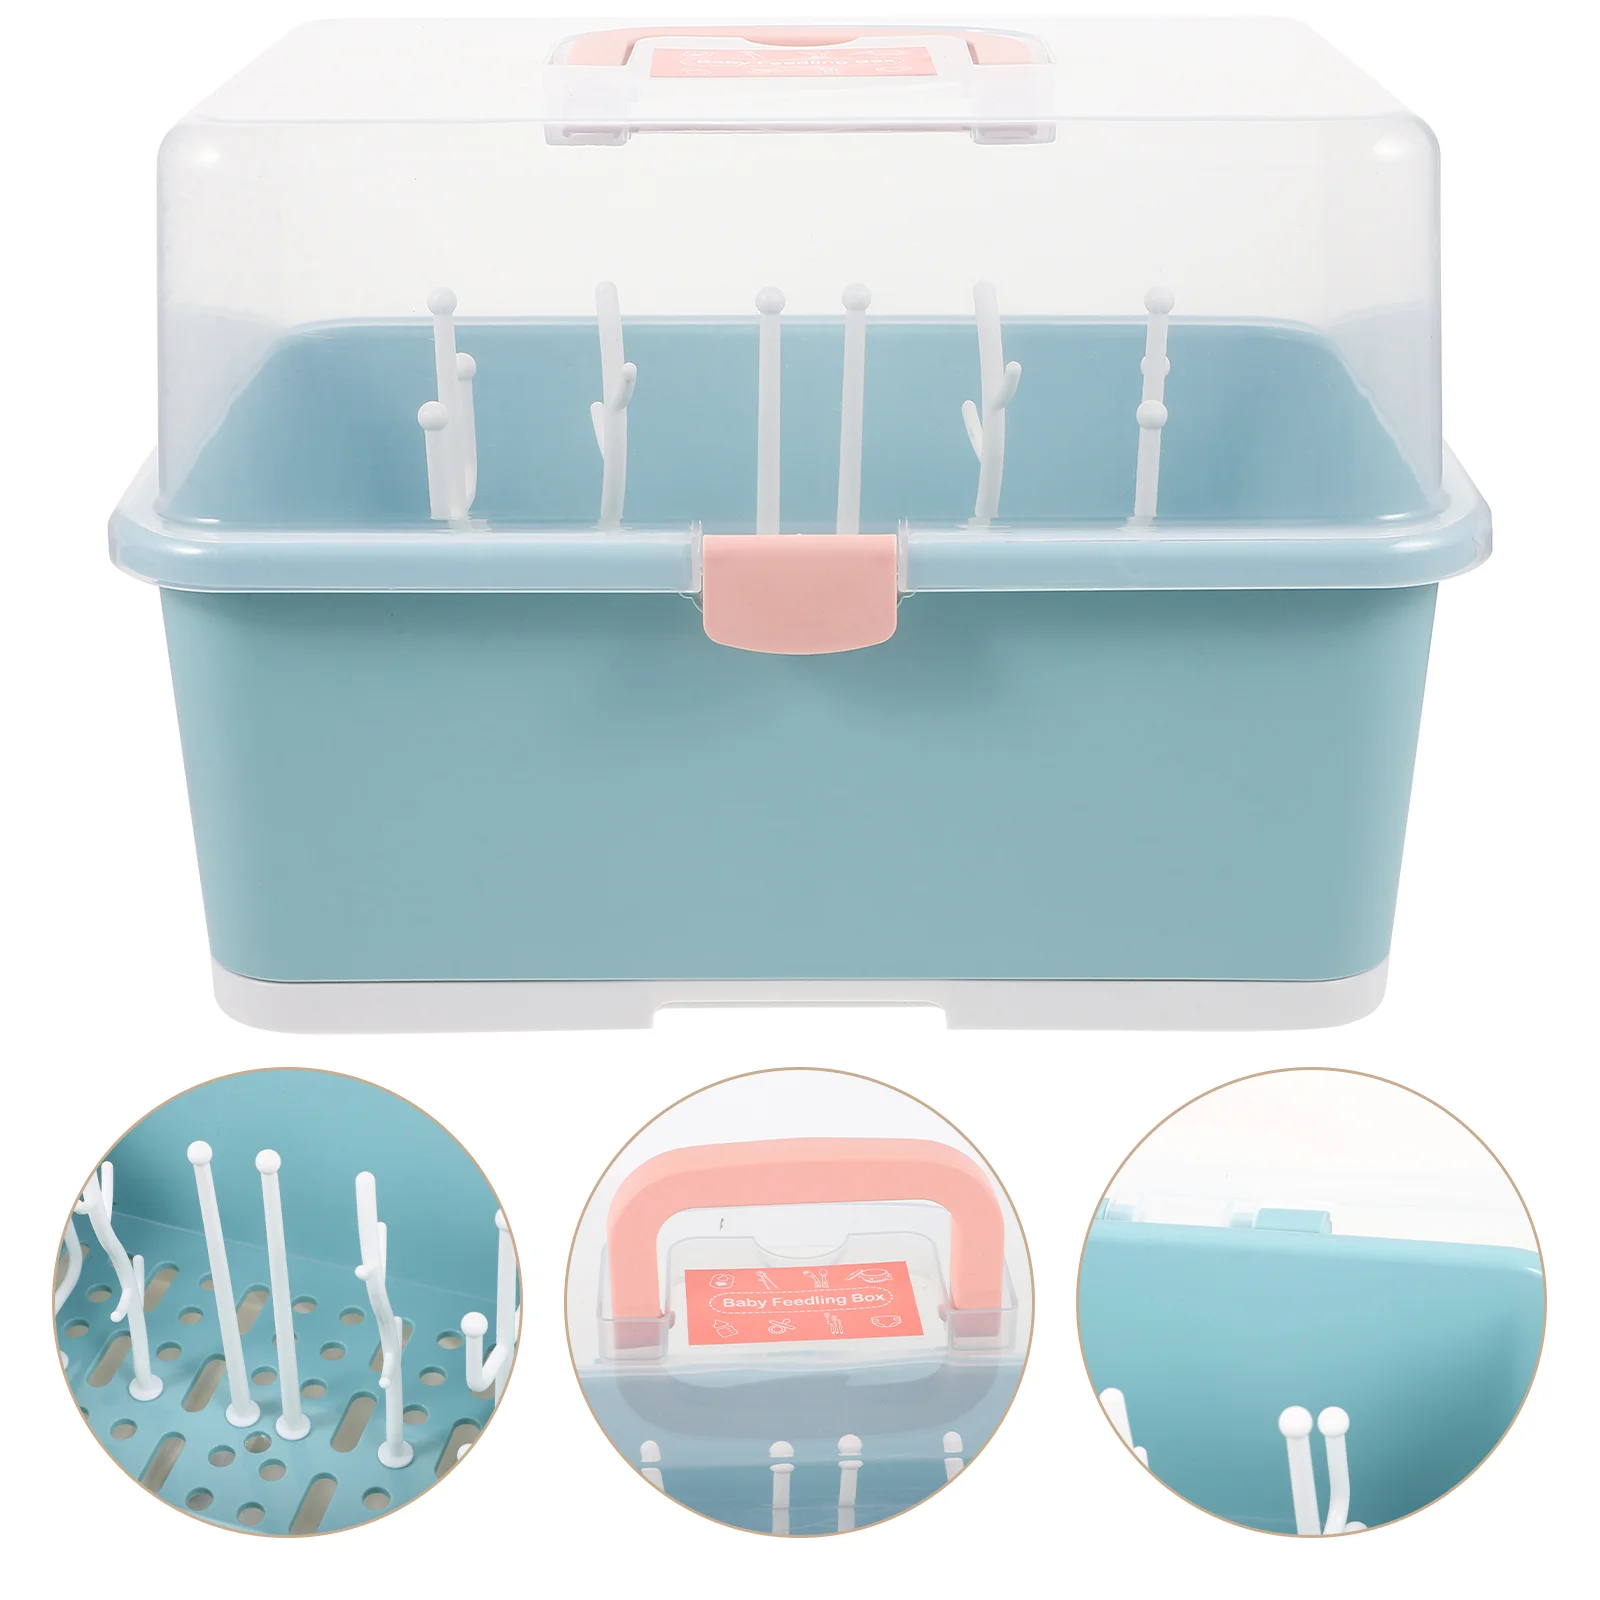 

Drain Tank Pacifier Storage Rack Case Baby Cup Clothes Drying Racks Milk Bottle for Toddlers